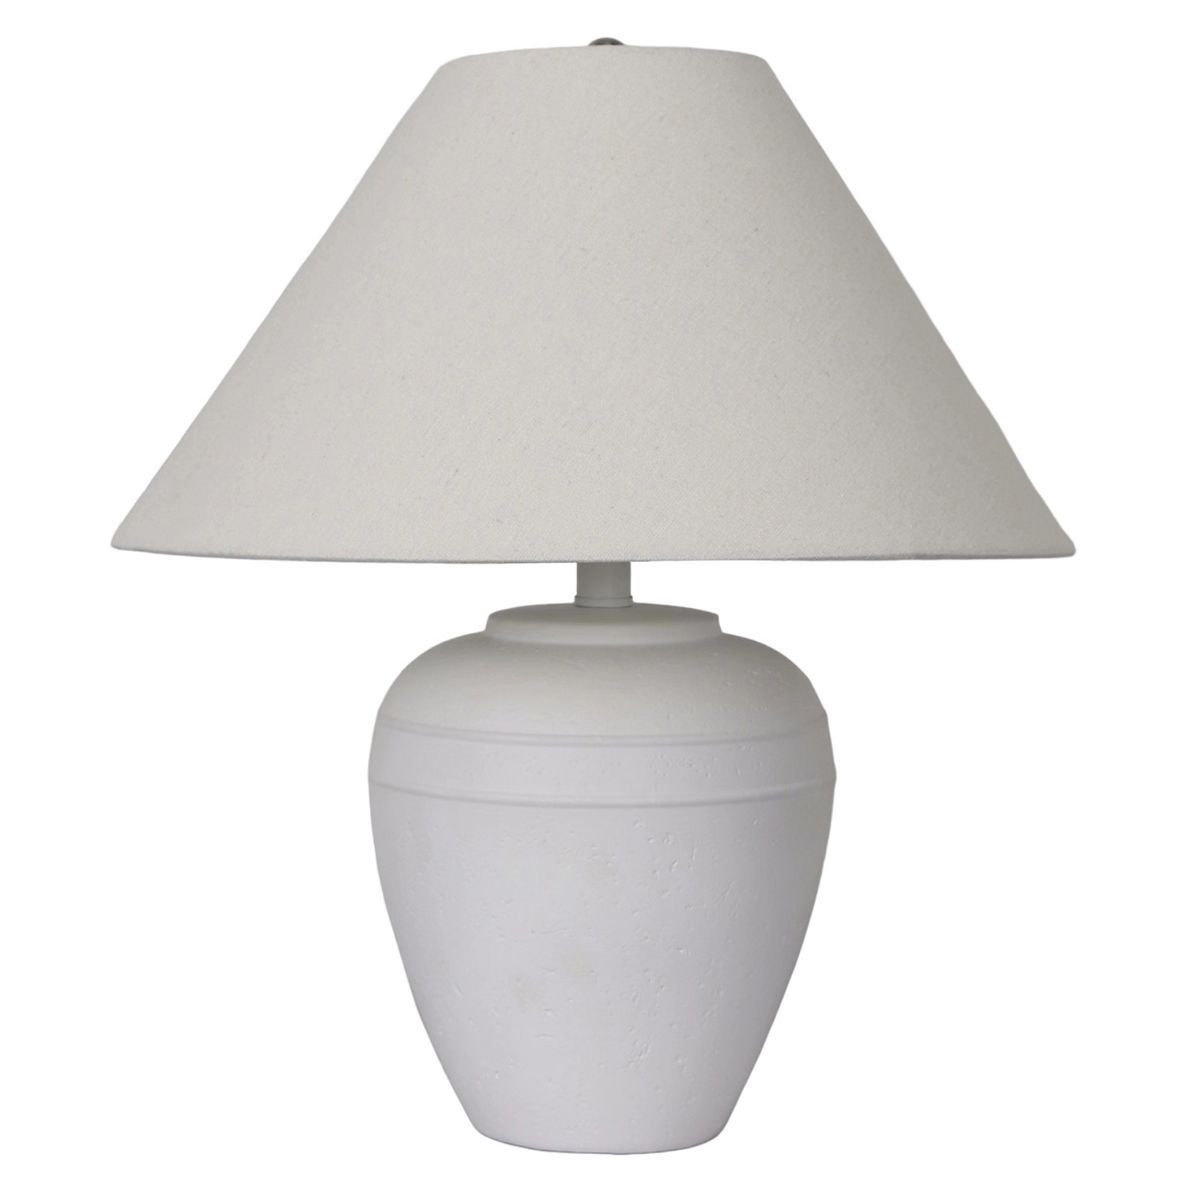 SAGEBROOK HOME 21" Textured Table Lamp Tapered Shade White | Target